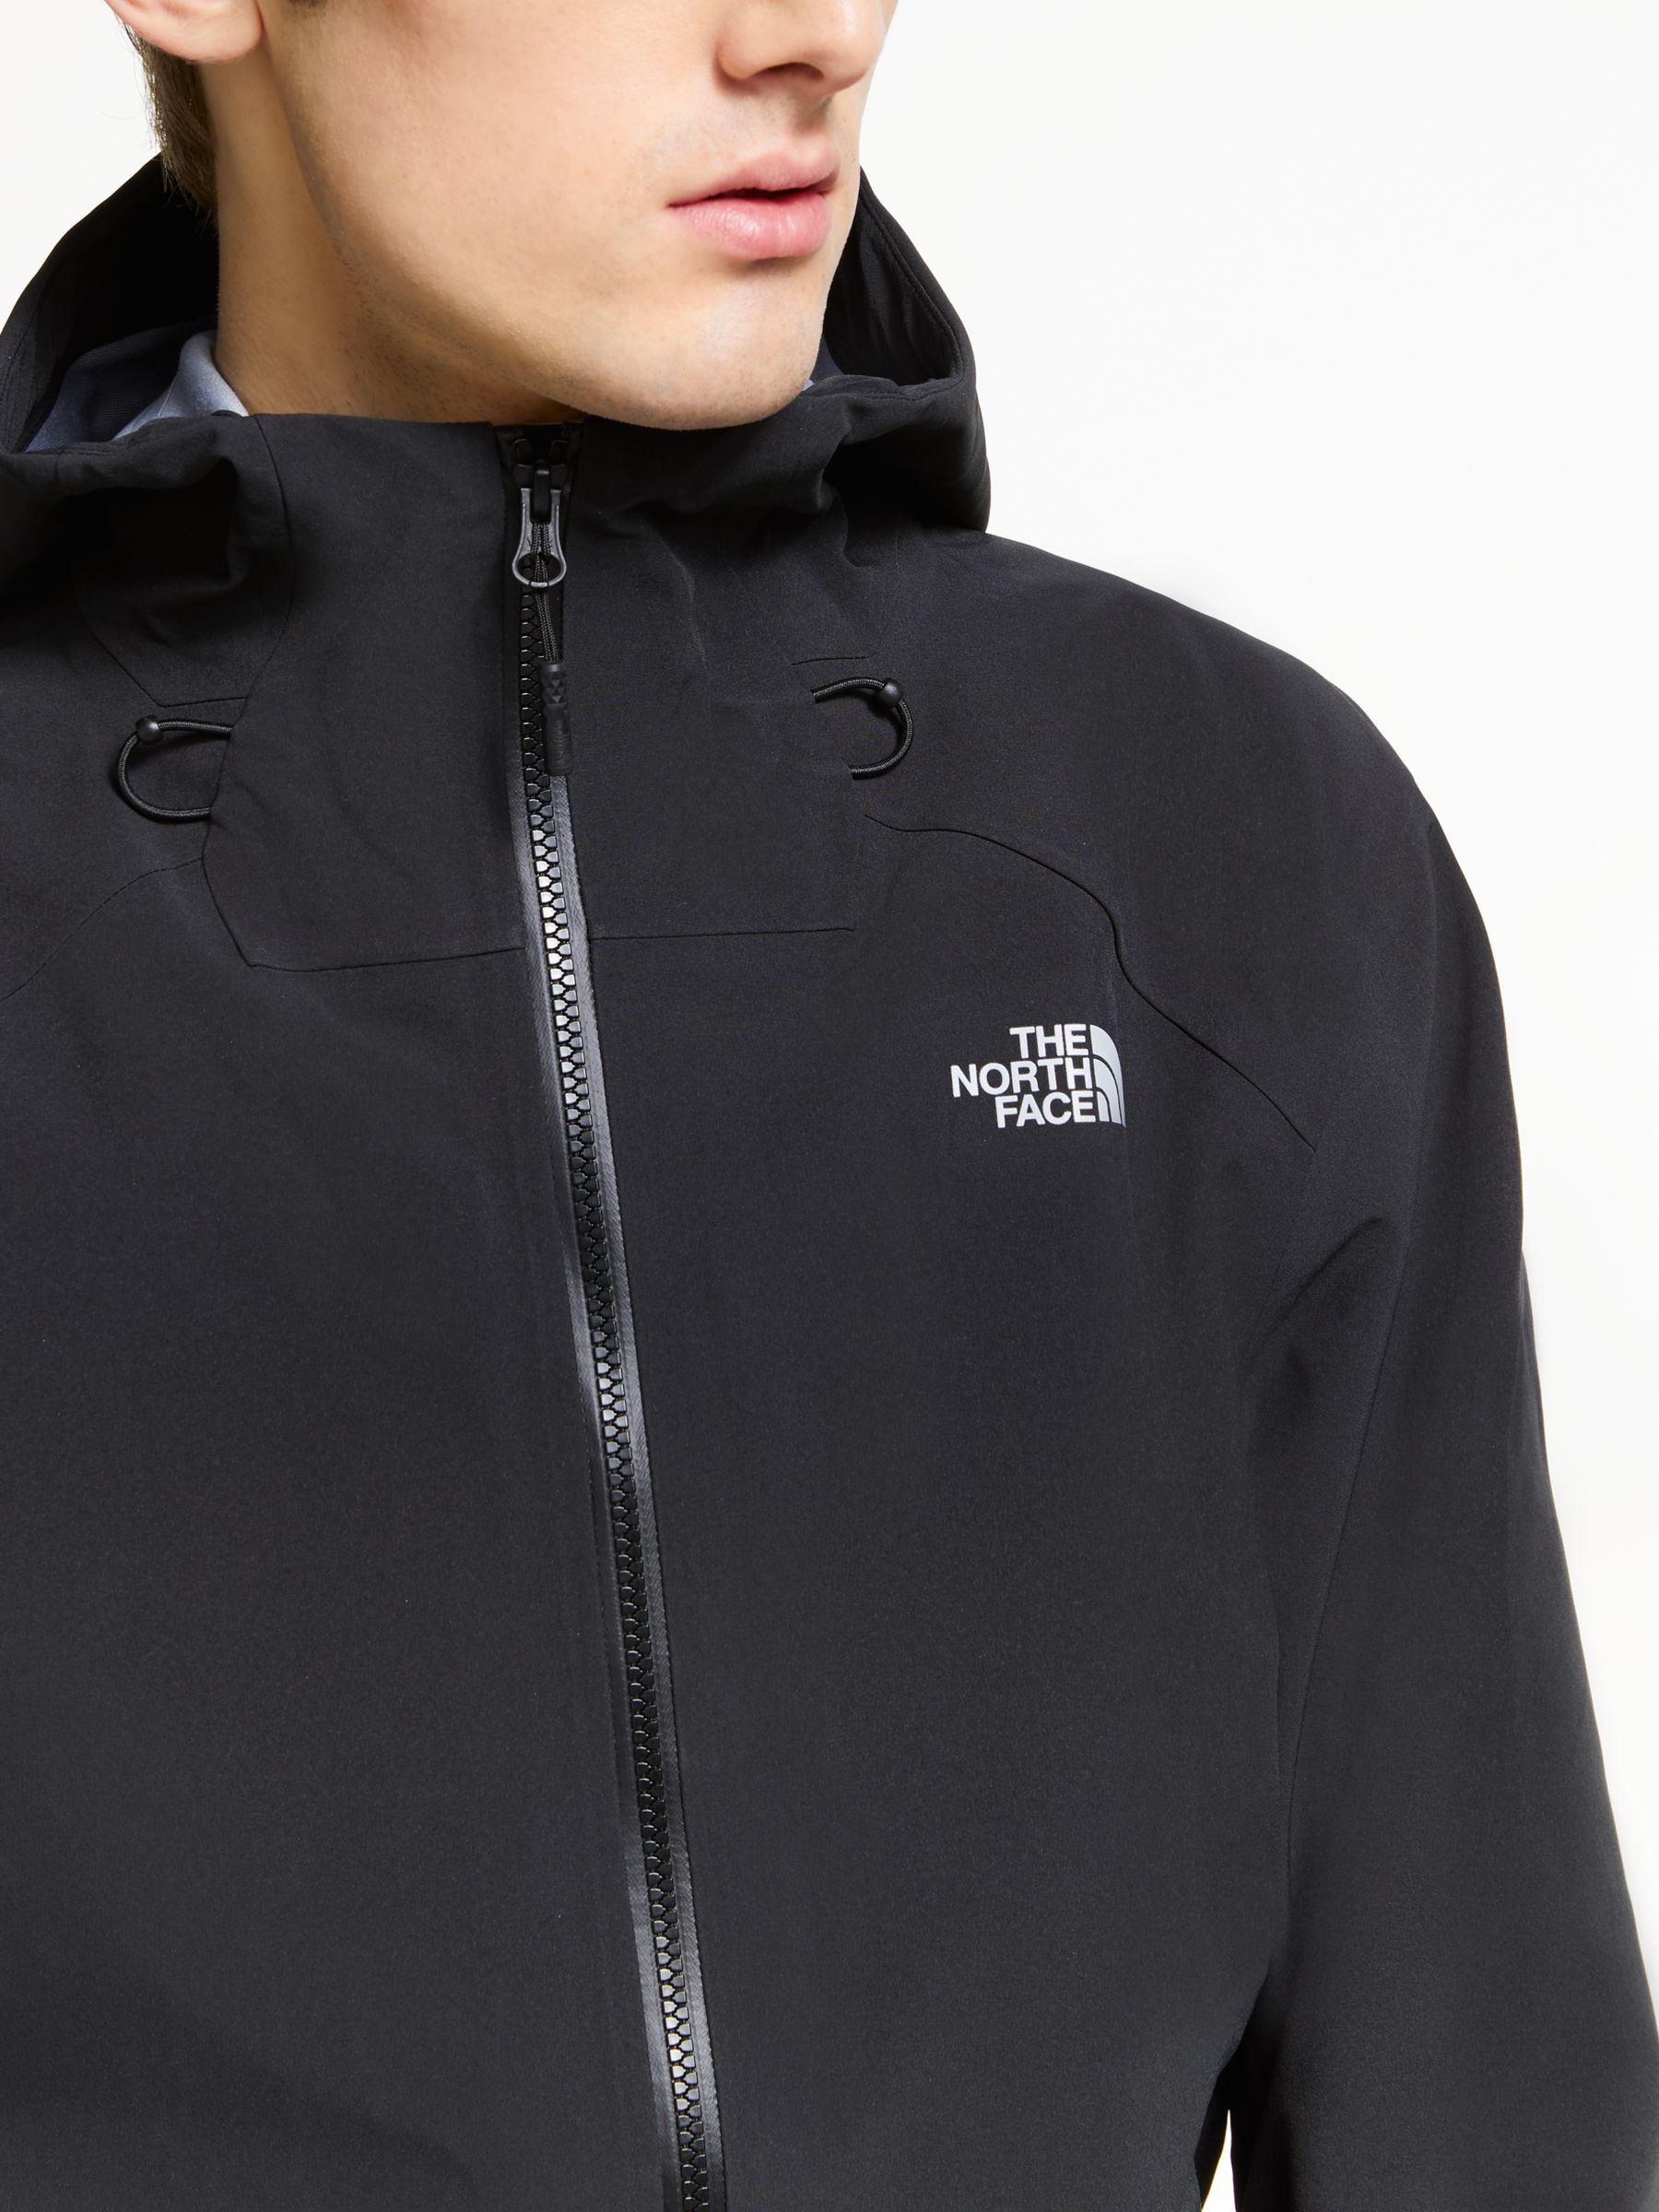 north face dryvent jacket review 